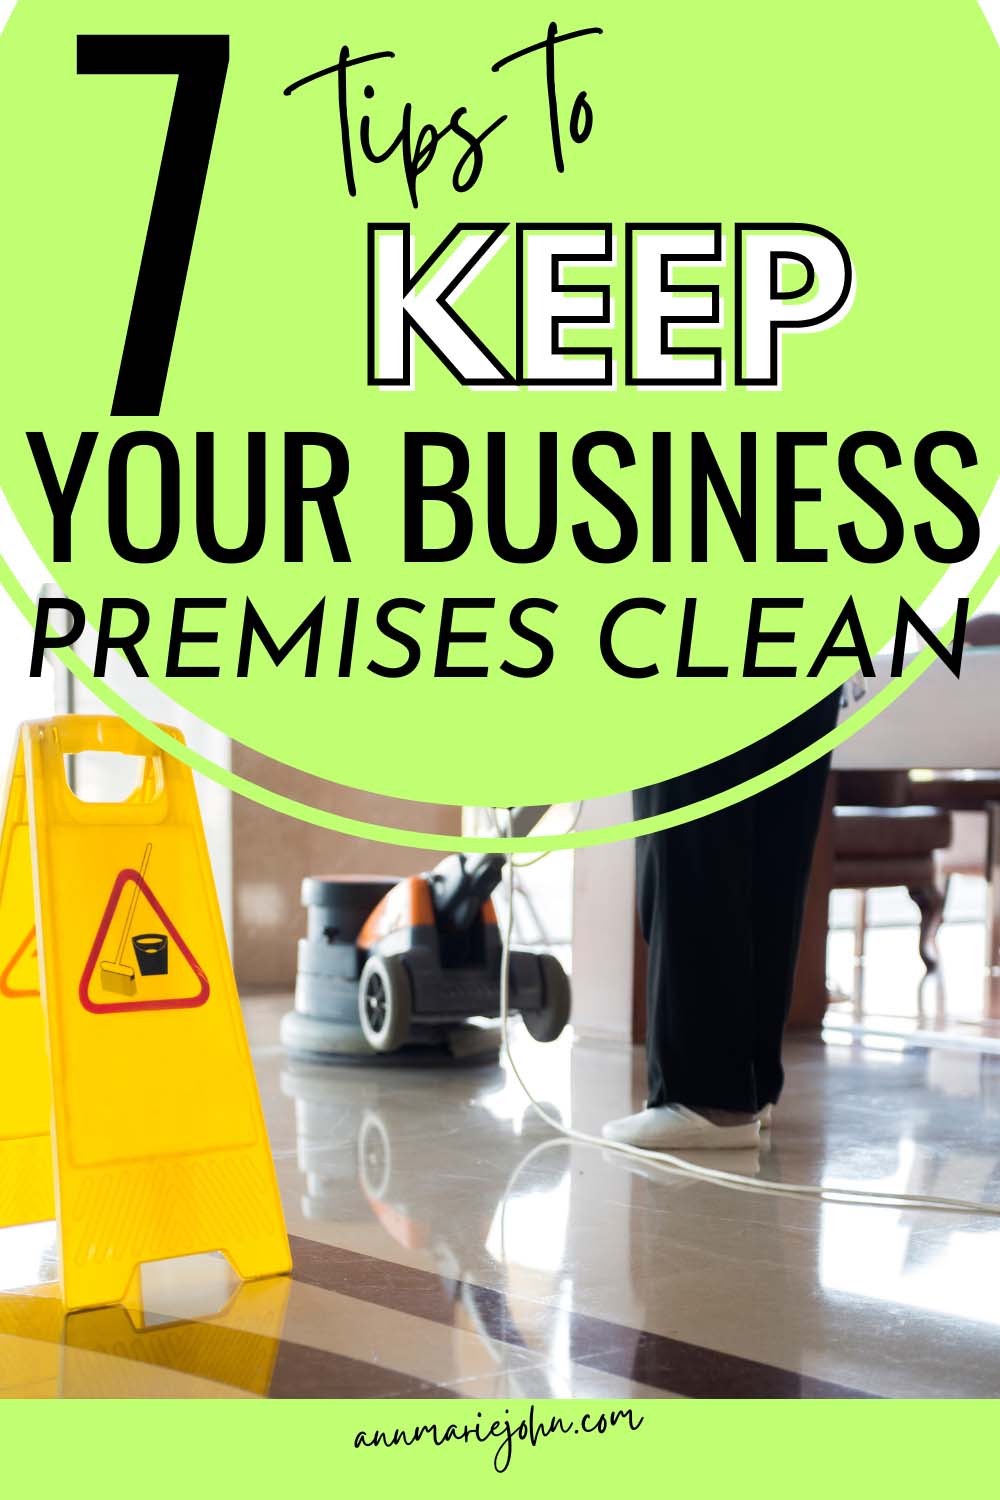 Keep Your Business Premises Clean